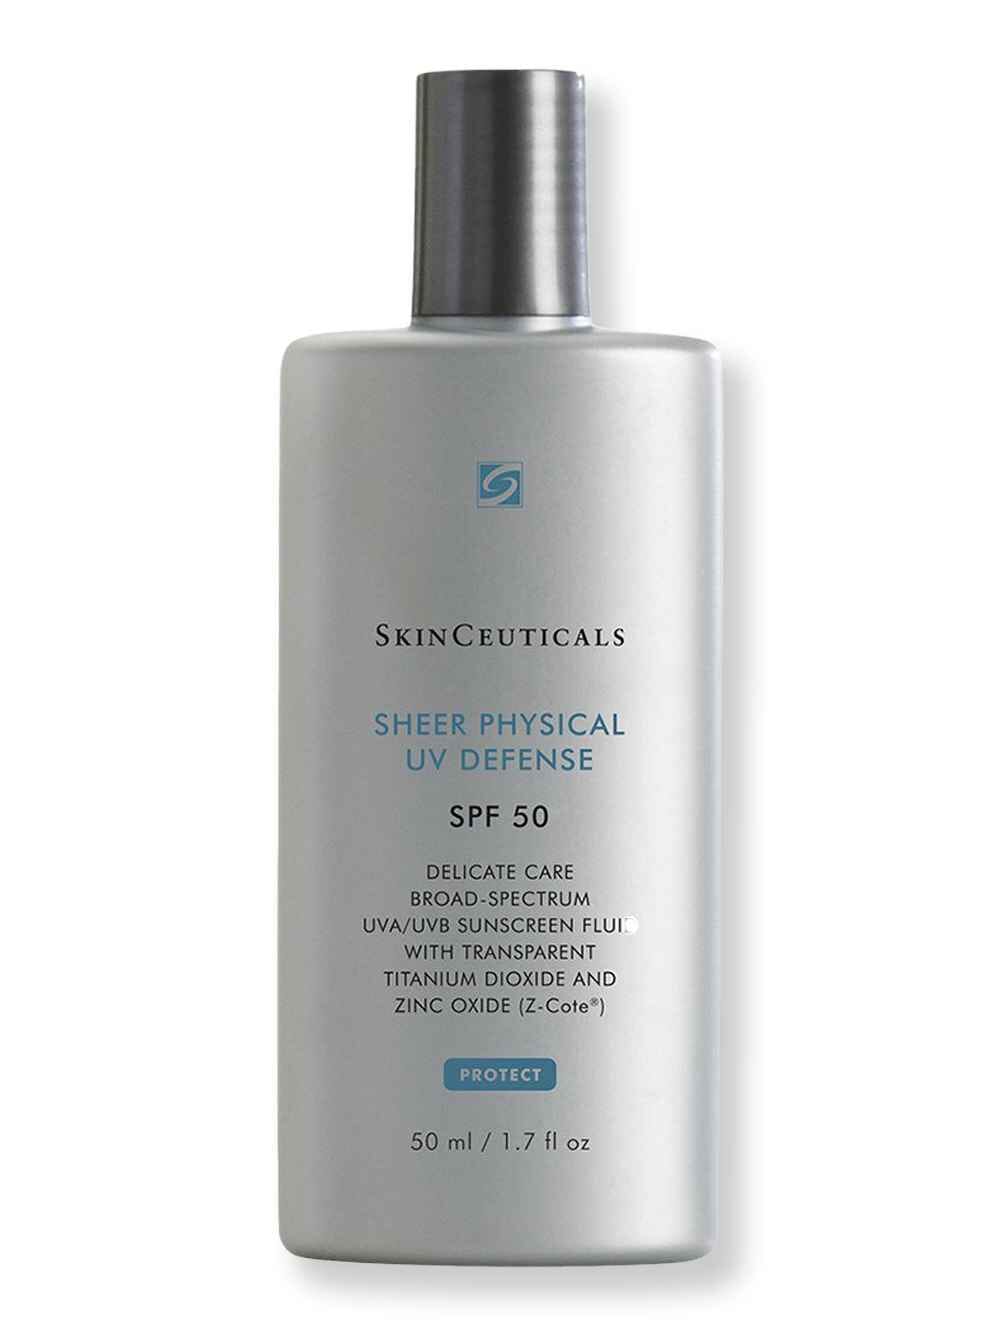 SkinCeuticals SkinCeuticals Sheer Physical UV Defense SPF 50 125 ml Face Sunscreens 